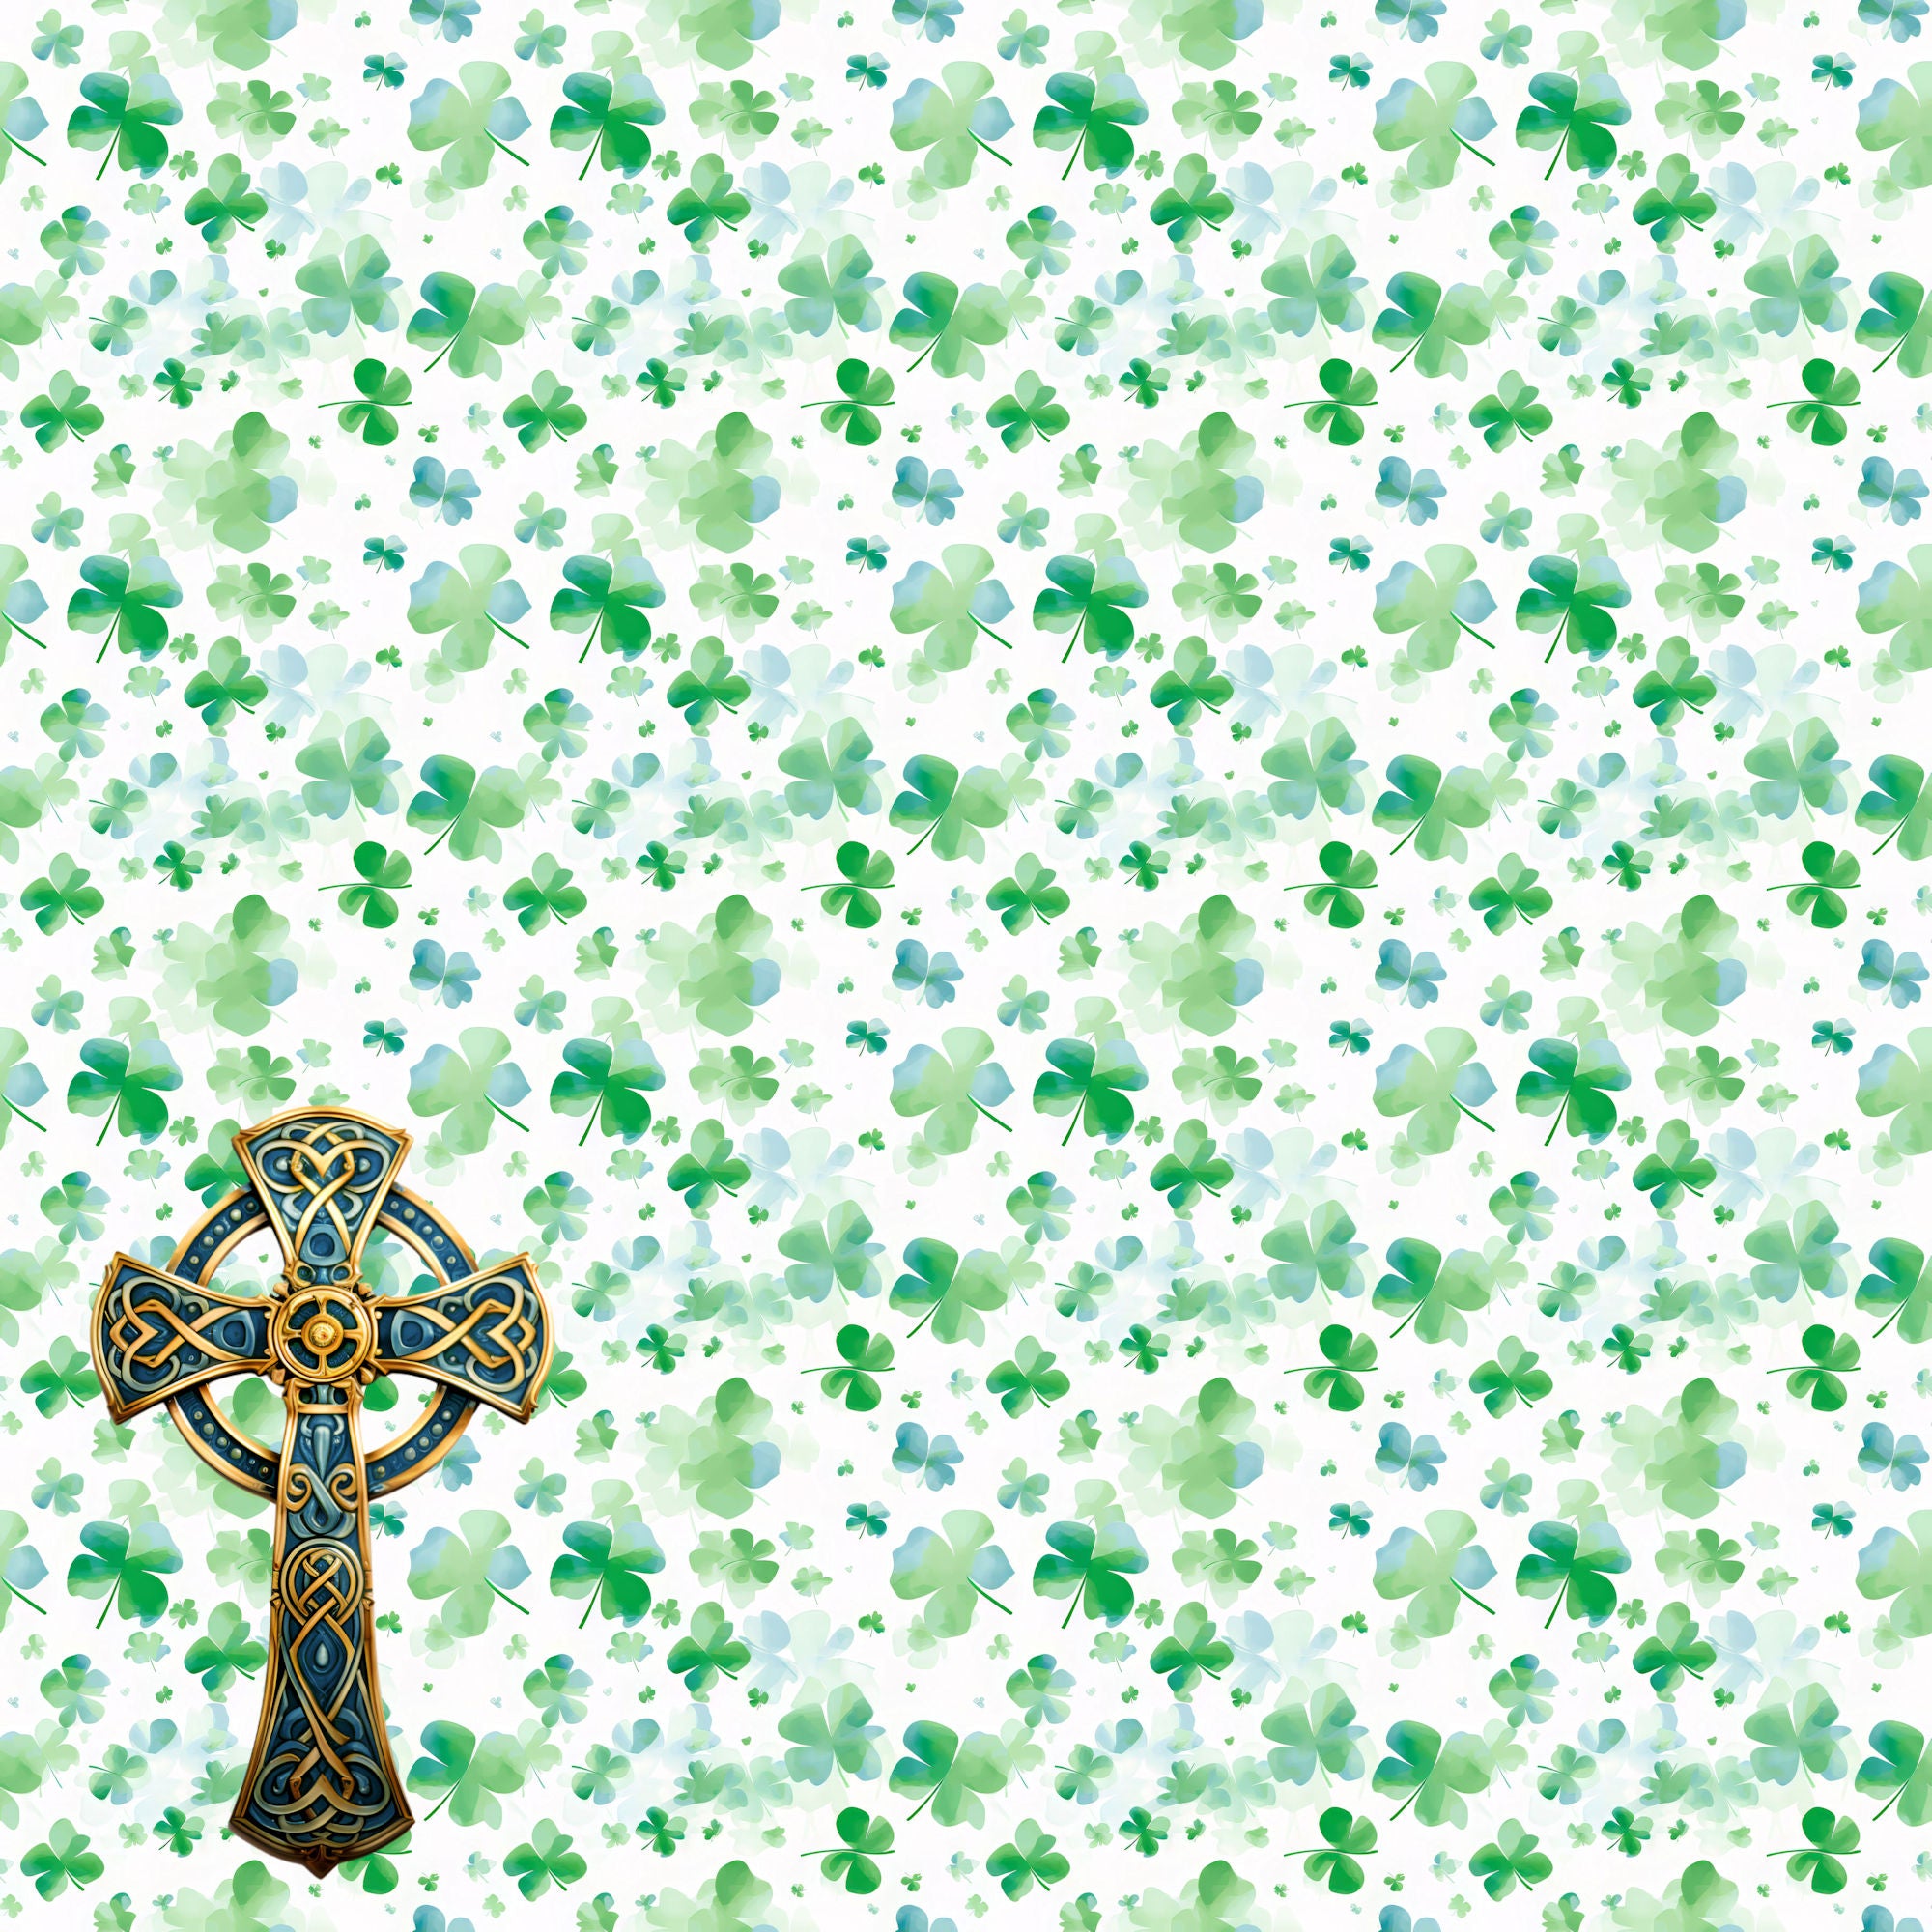 St. Patrick's Day Collection Celtic Cross 12 x 12 Double-Sided Scrapbook Paper by SSC Designs